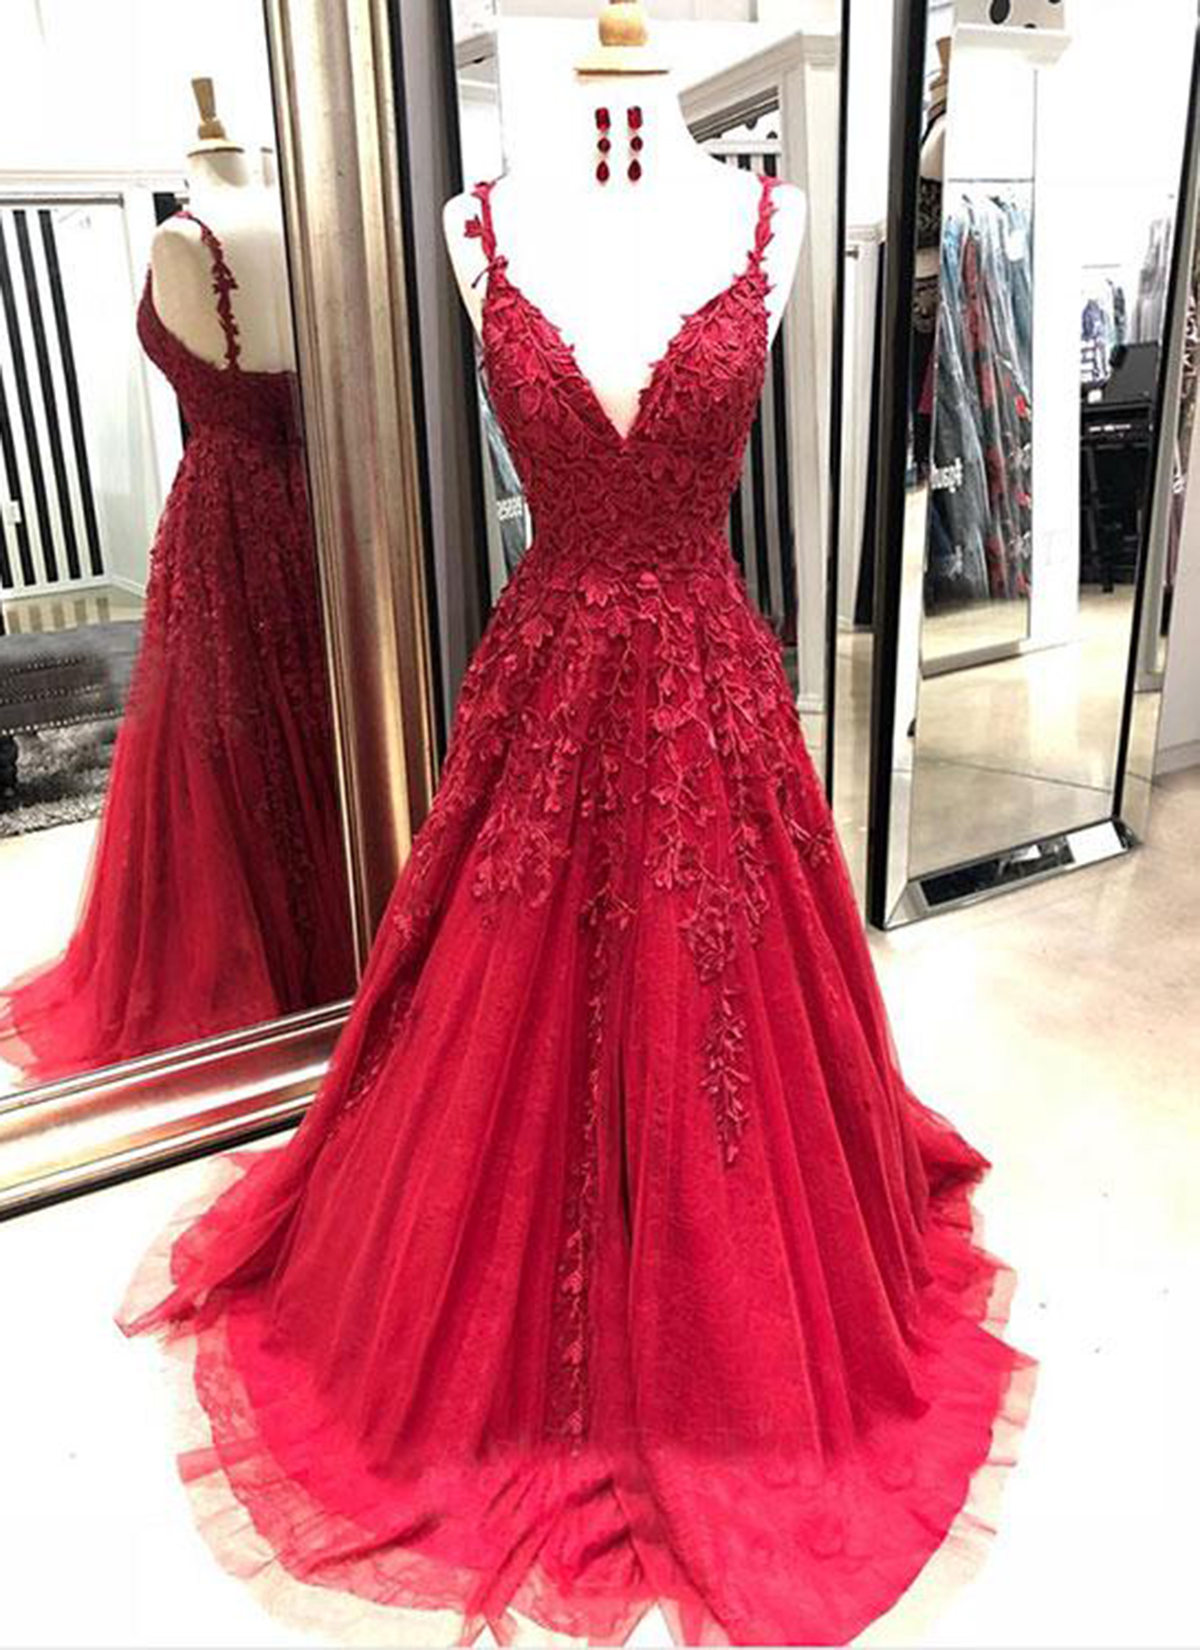 P3461 Burgundy Tulle V Neck Long Spring Prom Dress With Lace Appliqué